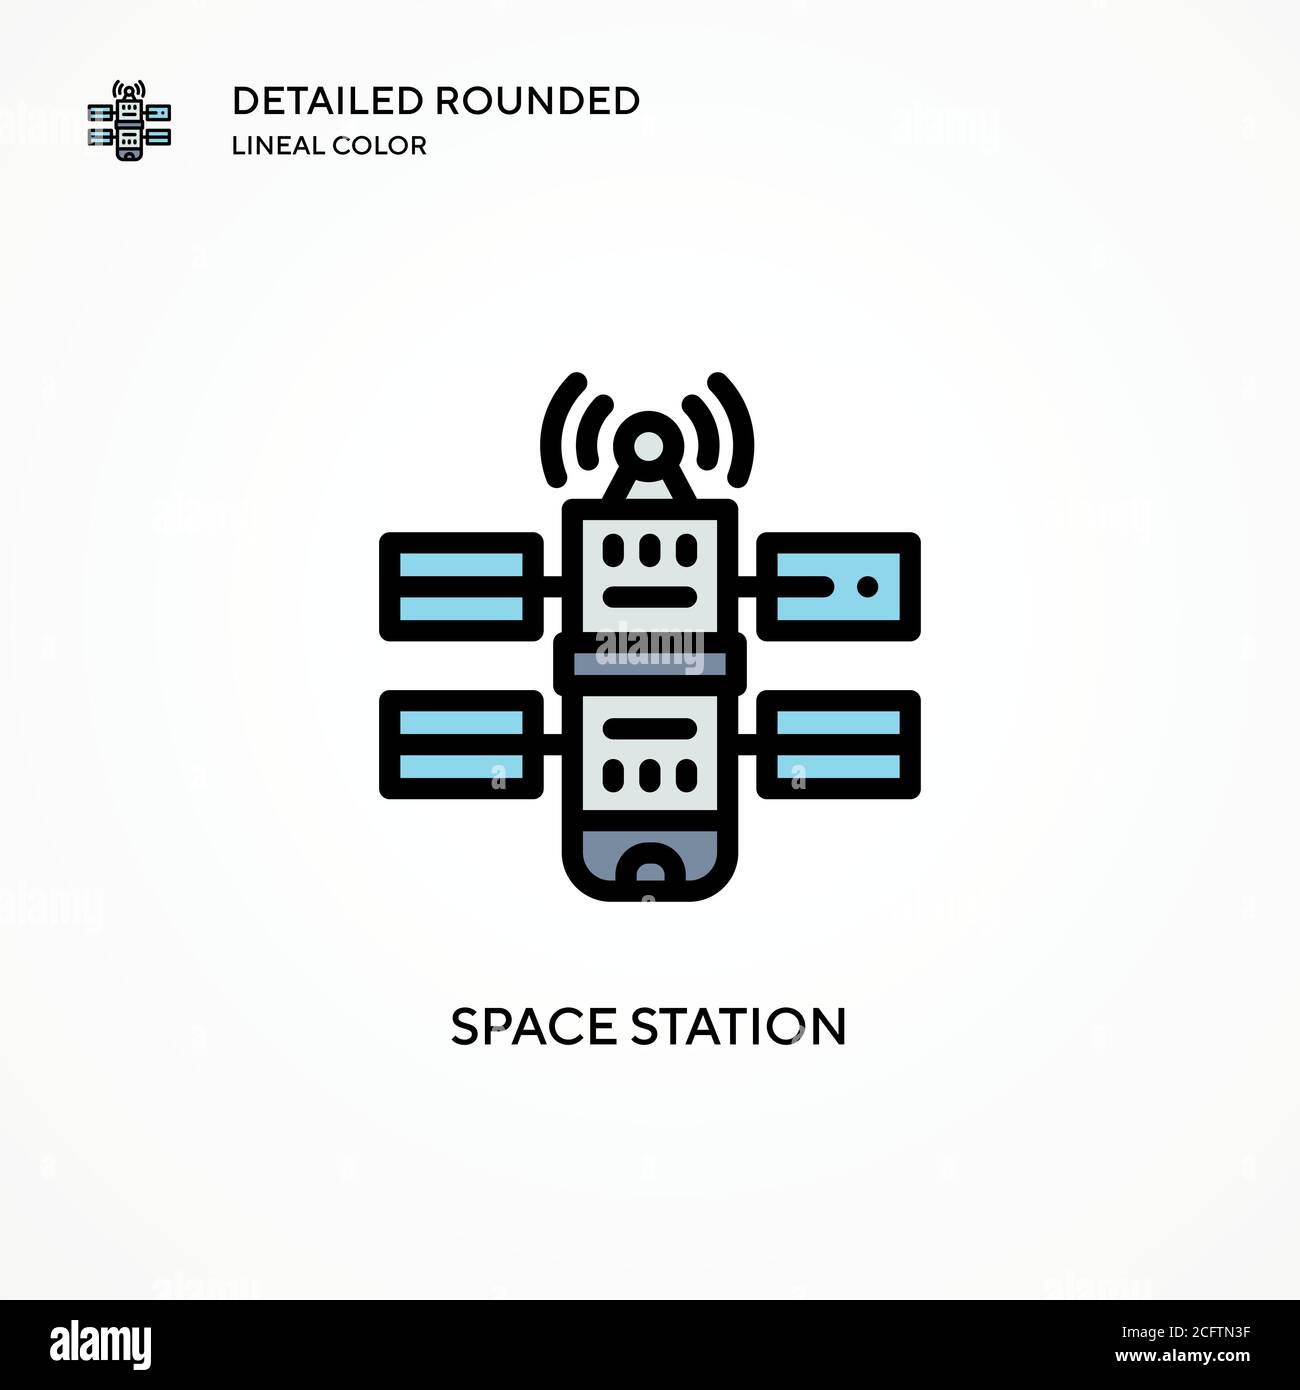 Space station vector icon. Modern vector illustration concepts. Easy to edit and customize. Stock Vector